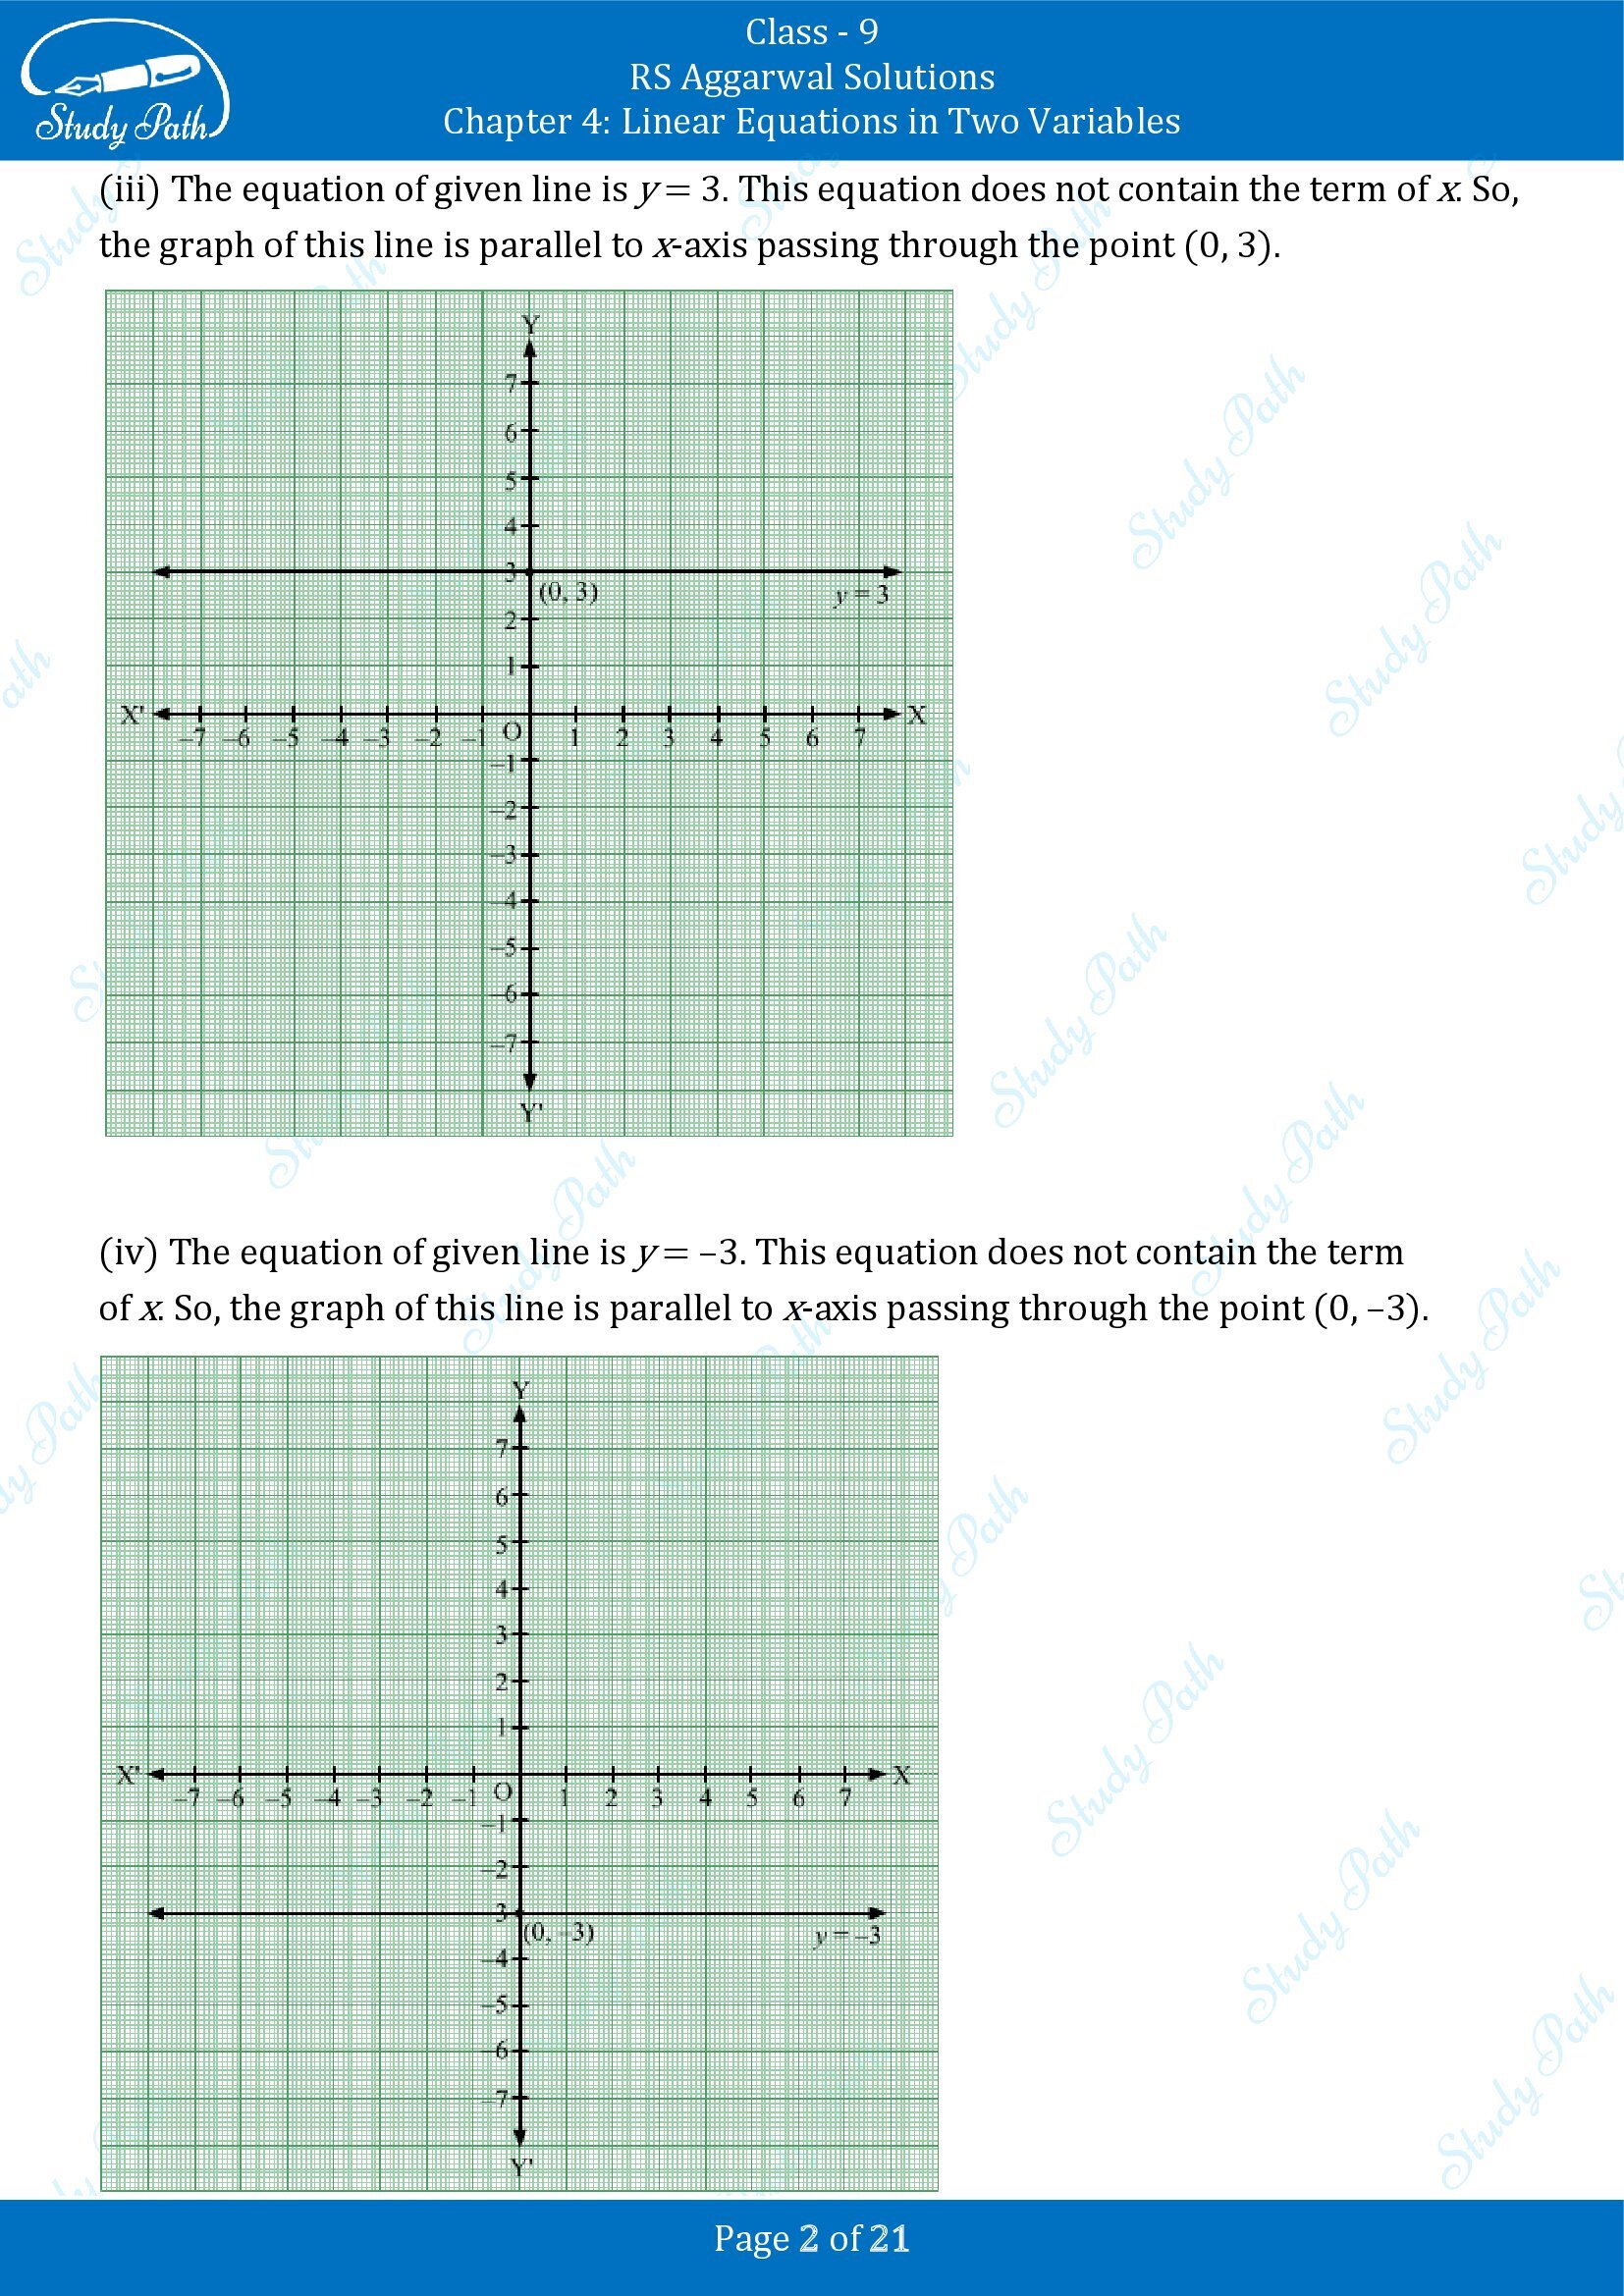 RS Aggarwal Solutions Class 9 Chapter 4 Linear Equations in Two Variables Exercise 4B 00002